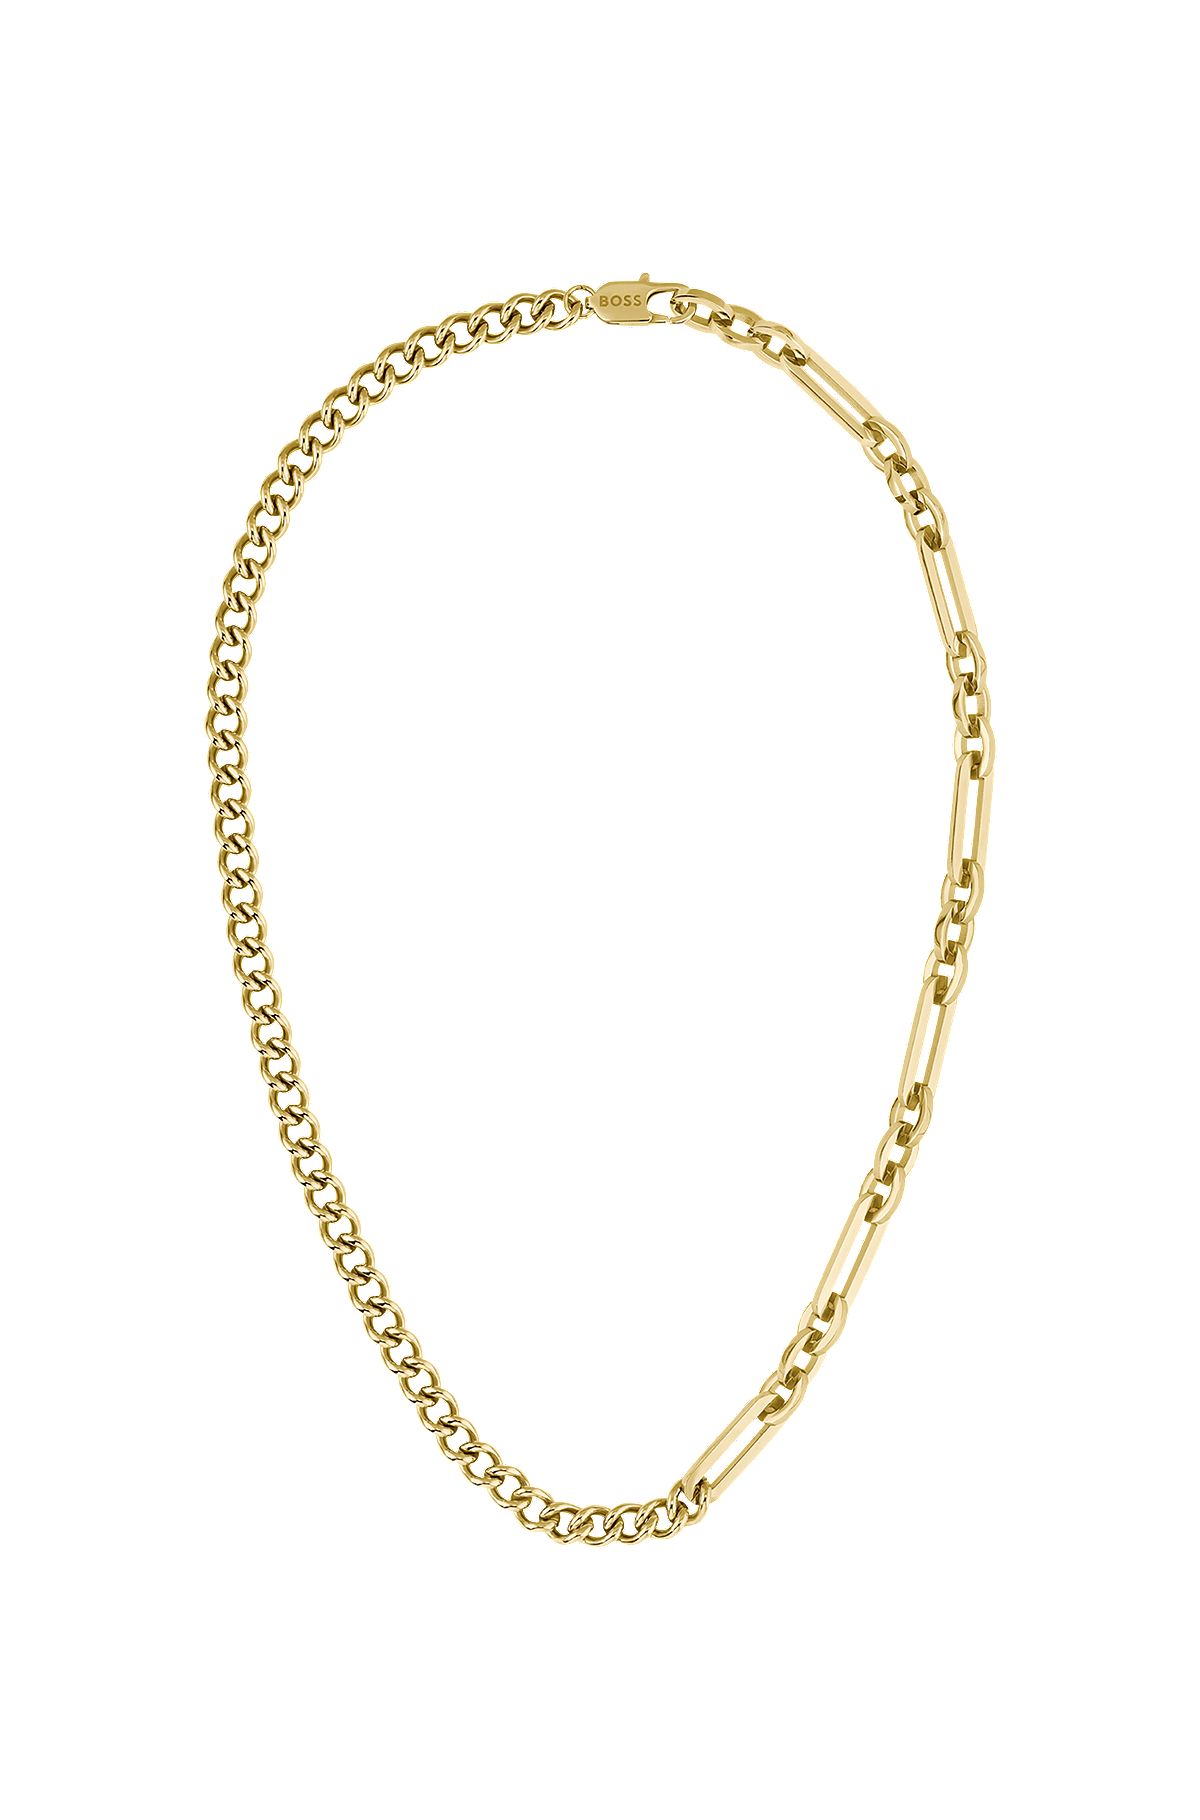 Yellow-gold-effect necklace with chain and links, Gold